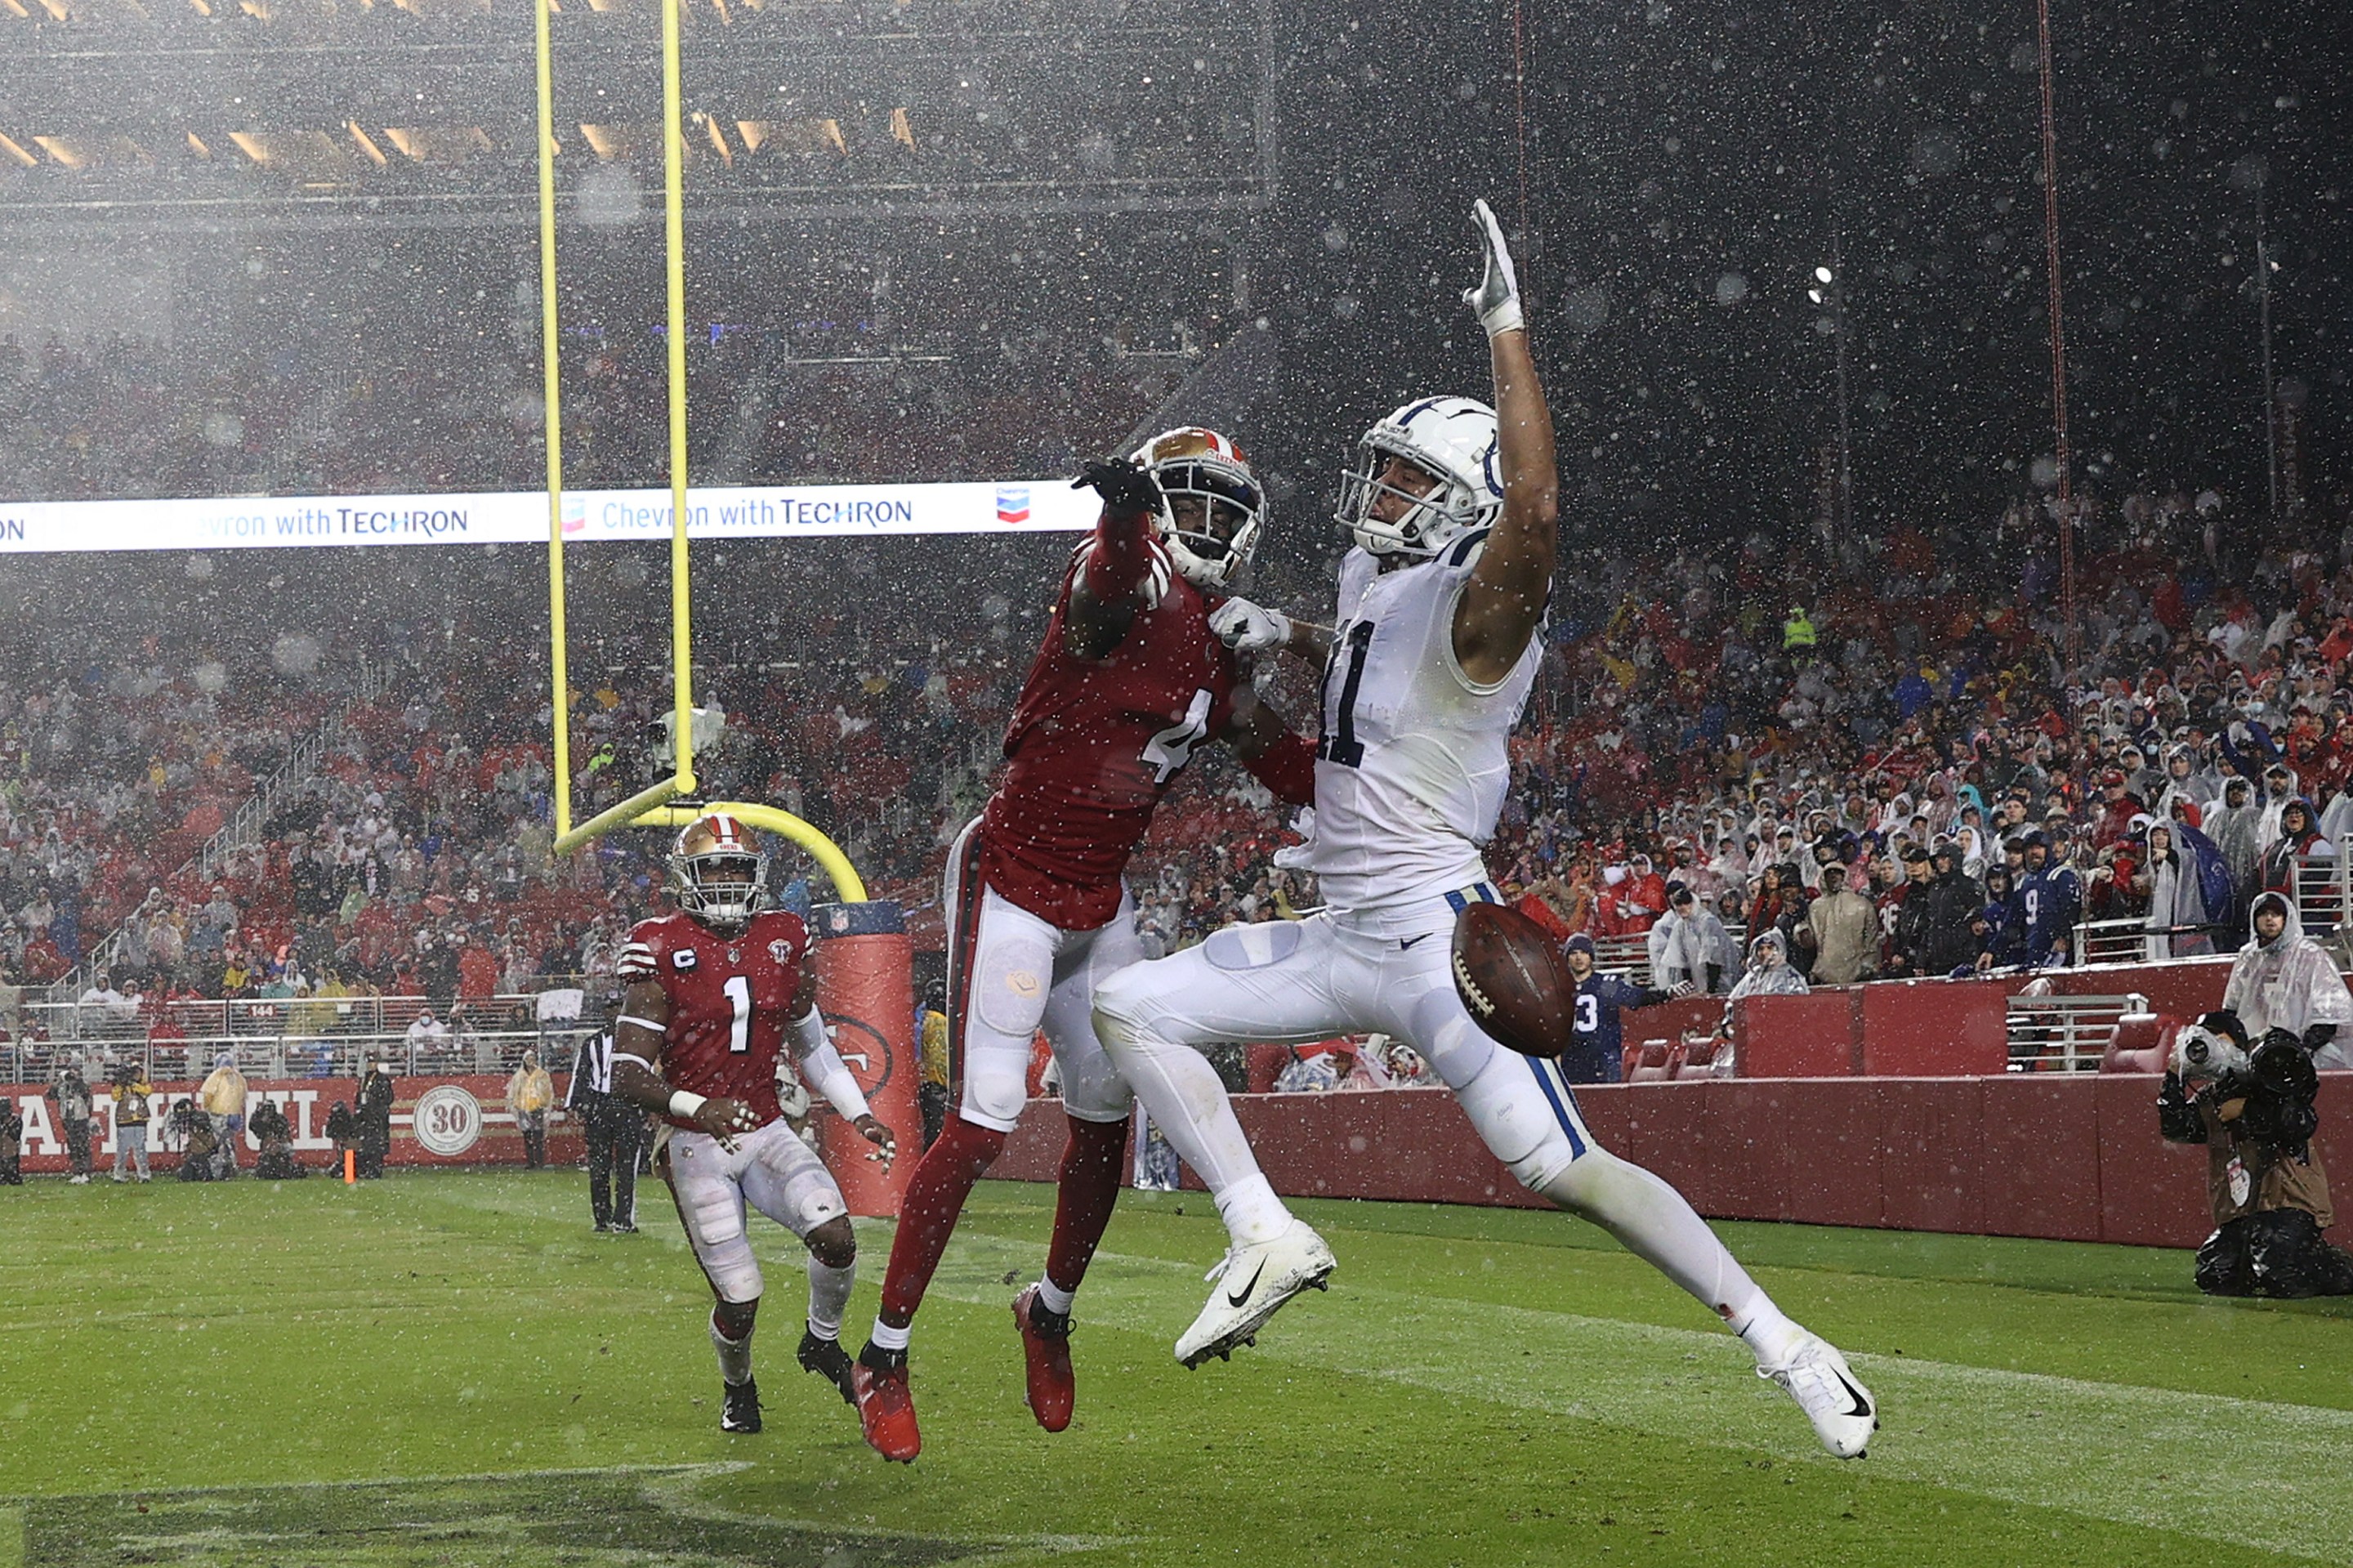 Colts receiver Michael Pittman Jr. and 49ers defensive back Emmanuel Moseley compete for a pass in the rain on Sunday Night Football.